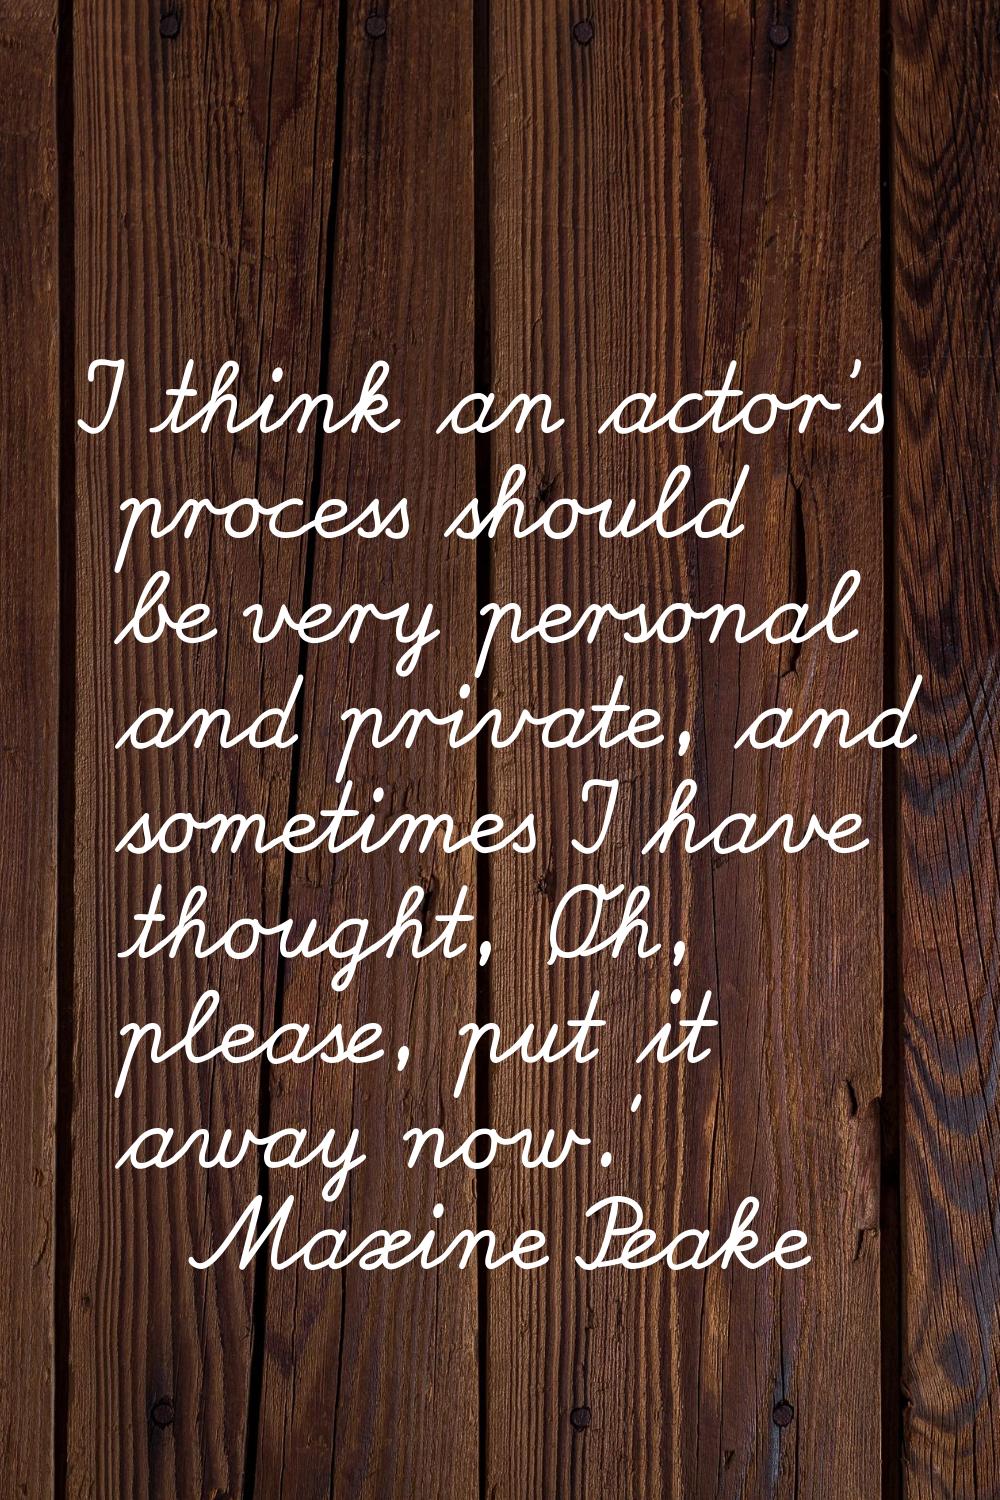 I think an actor's process should be very personal and private, and sometimes I have thought, 'Oh, 